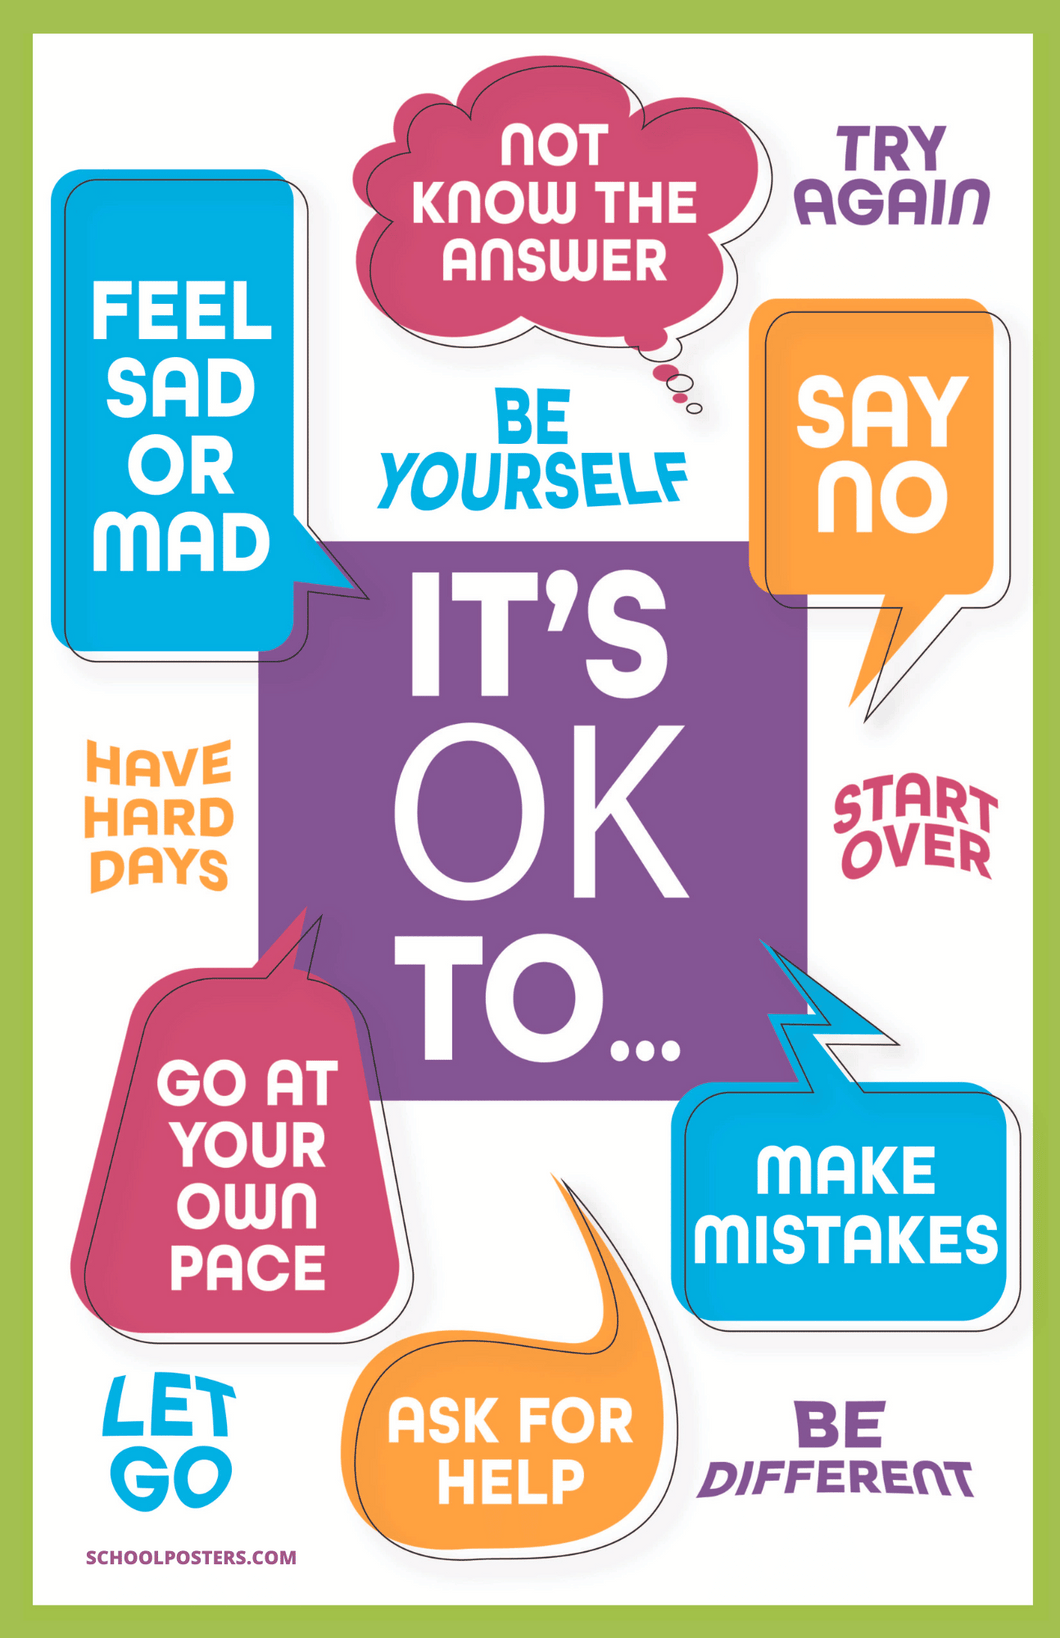 It's Ok To… Poster